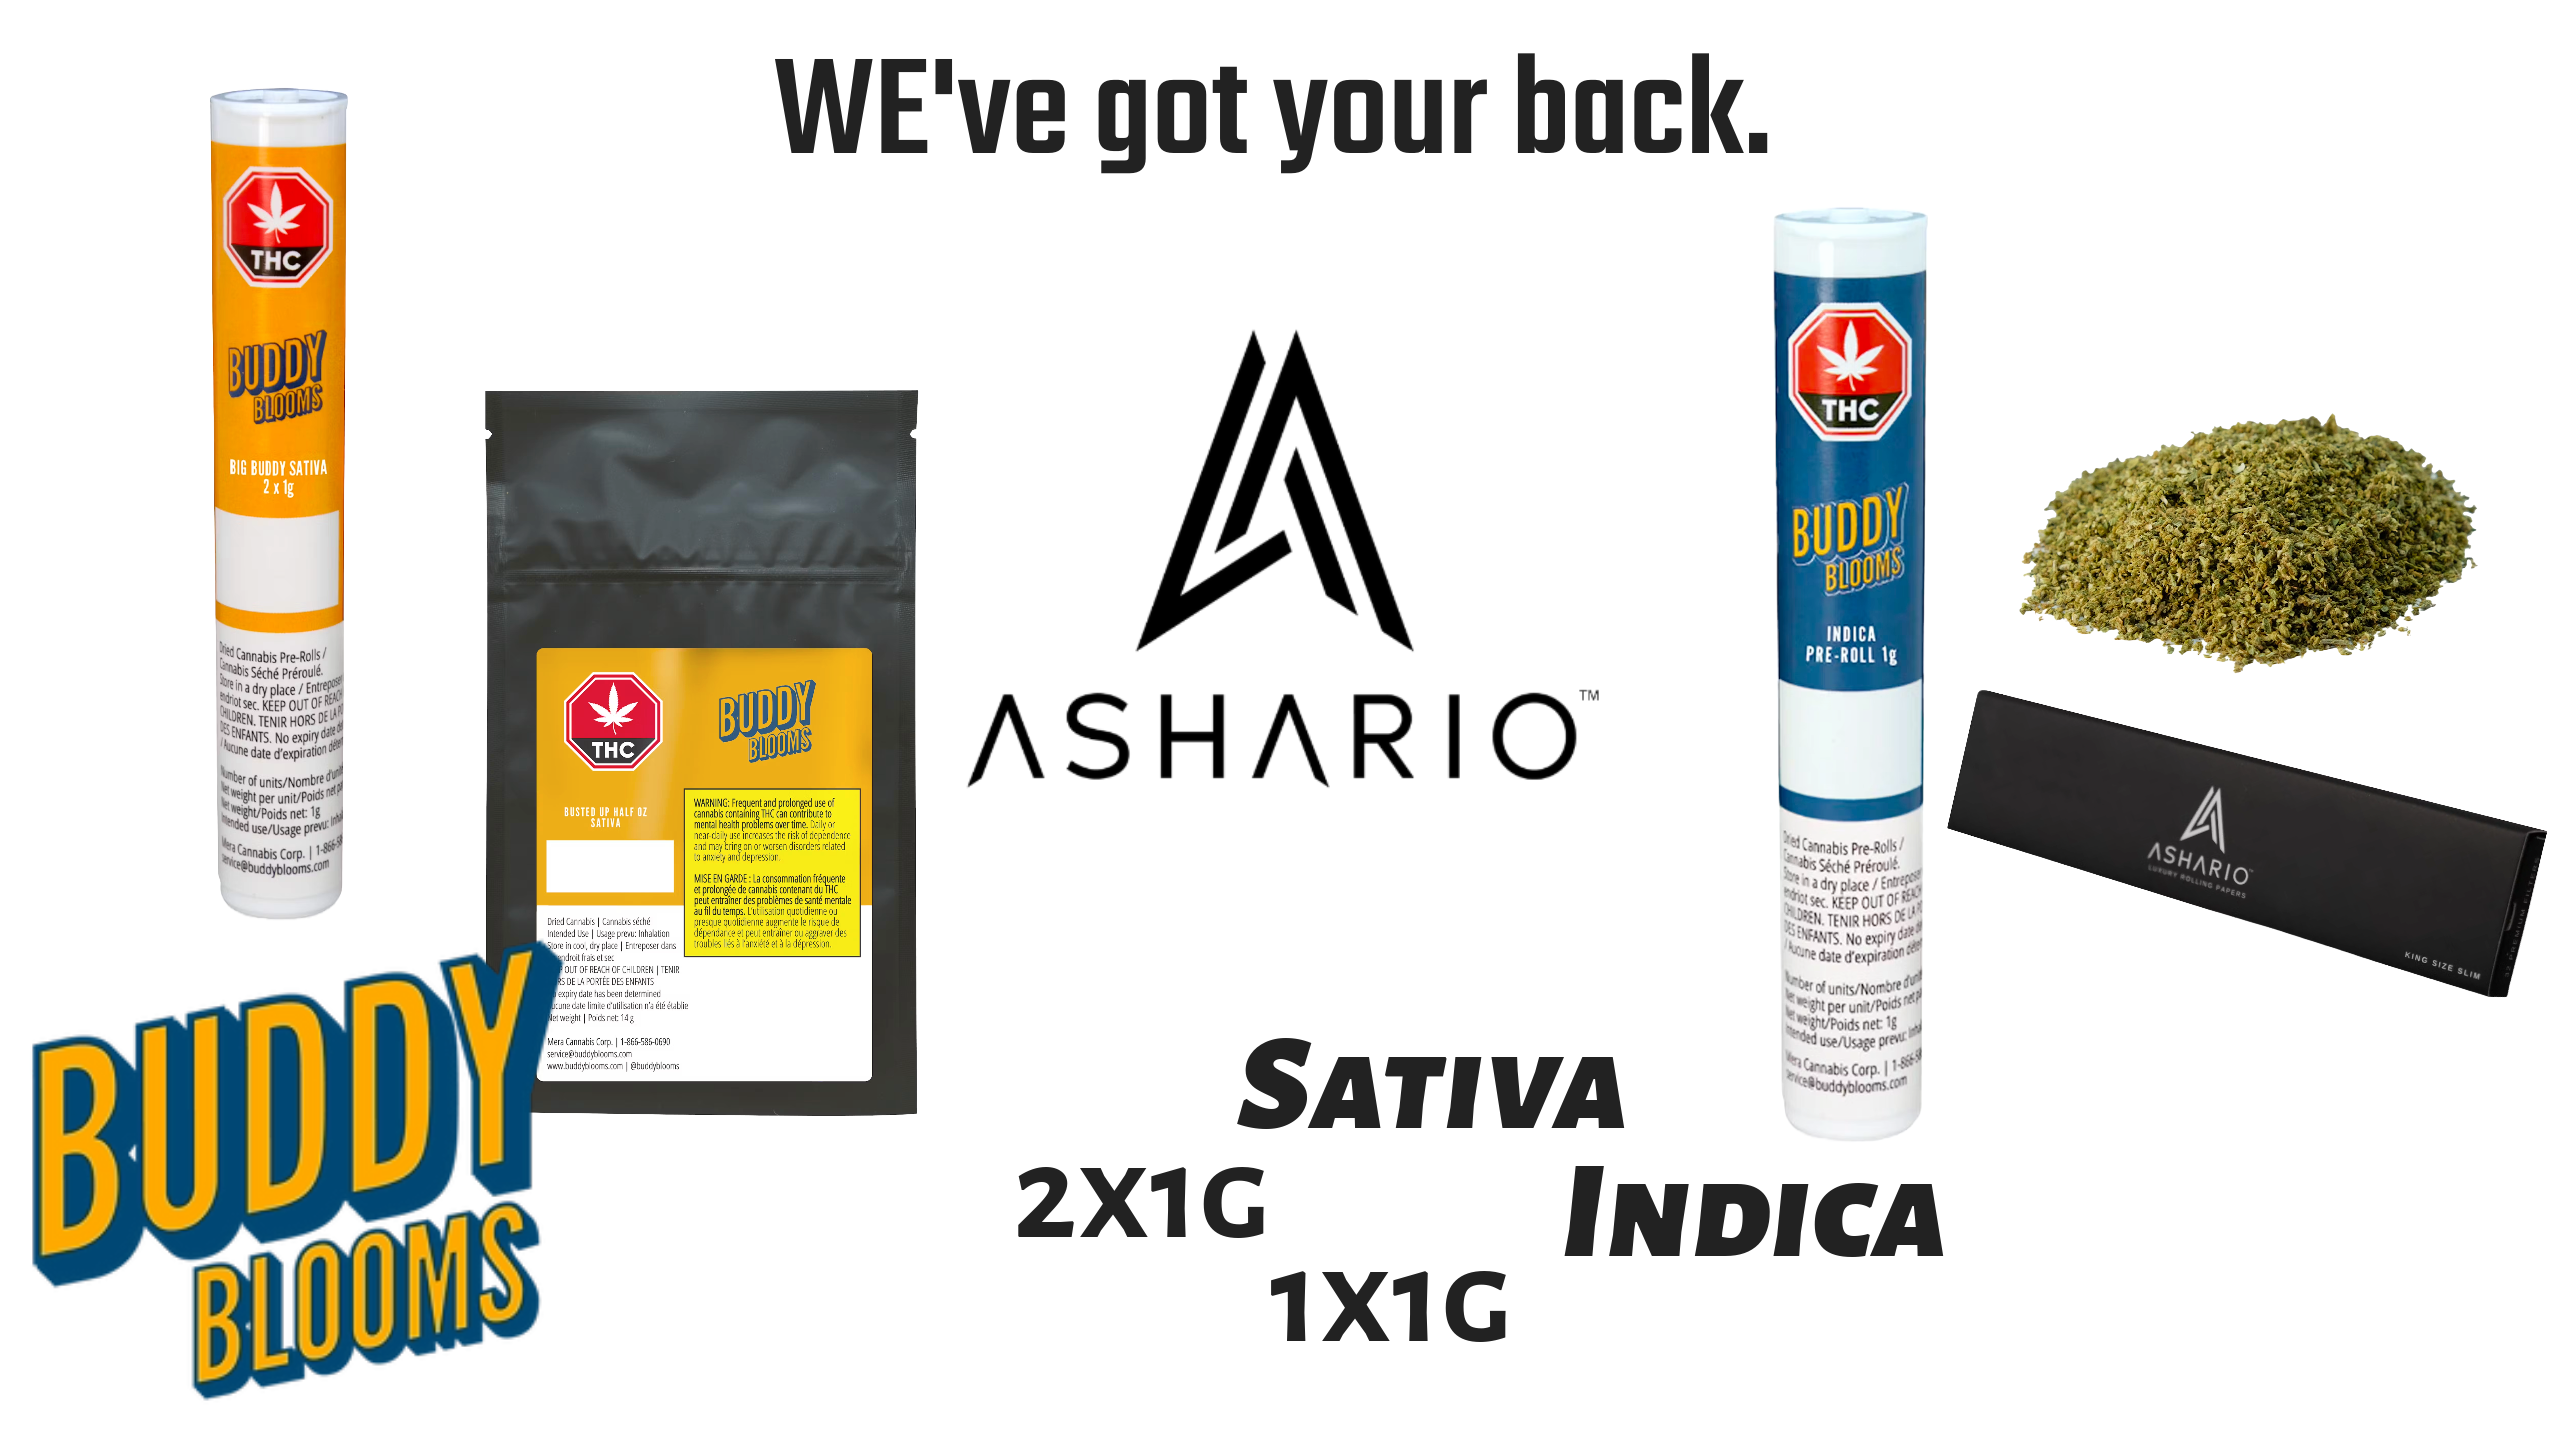 Embark on a journey of elevated cannabis enjoyment with Buddy Blooms, the premier destination for milled flower and pre-rolls in Canada, now available at Ashario Cannabis.